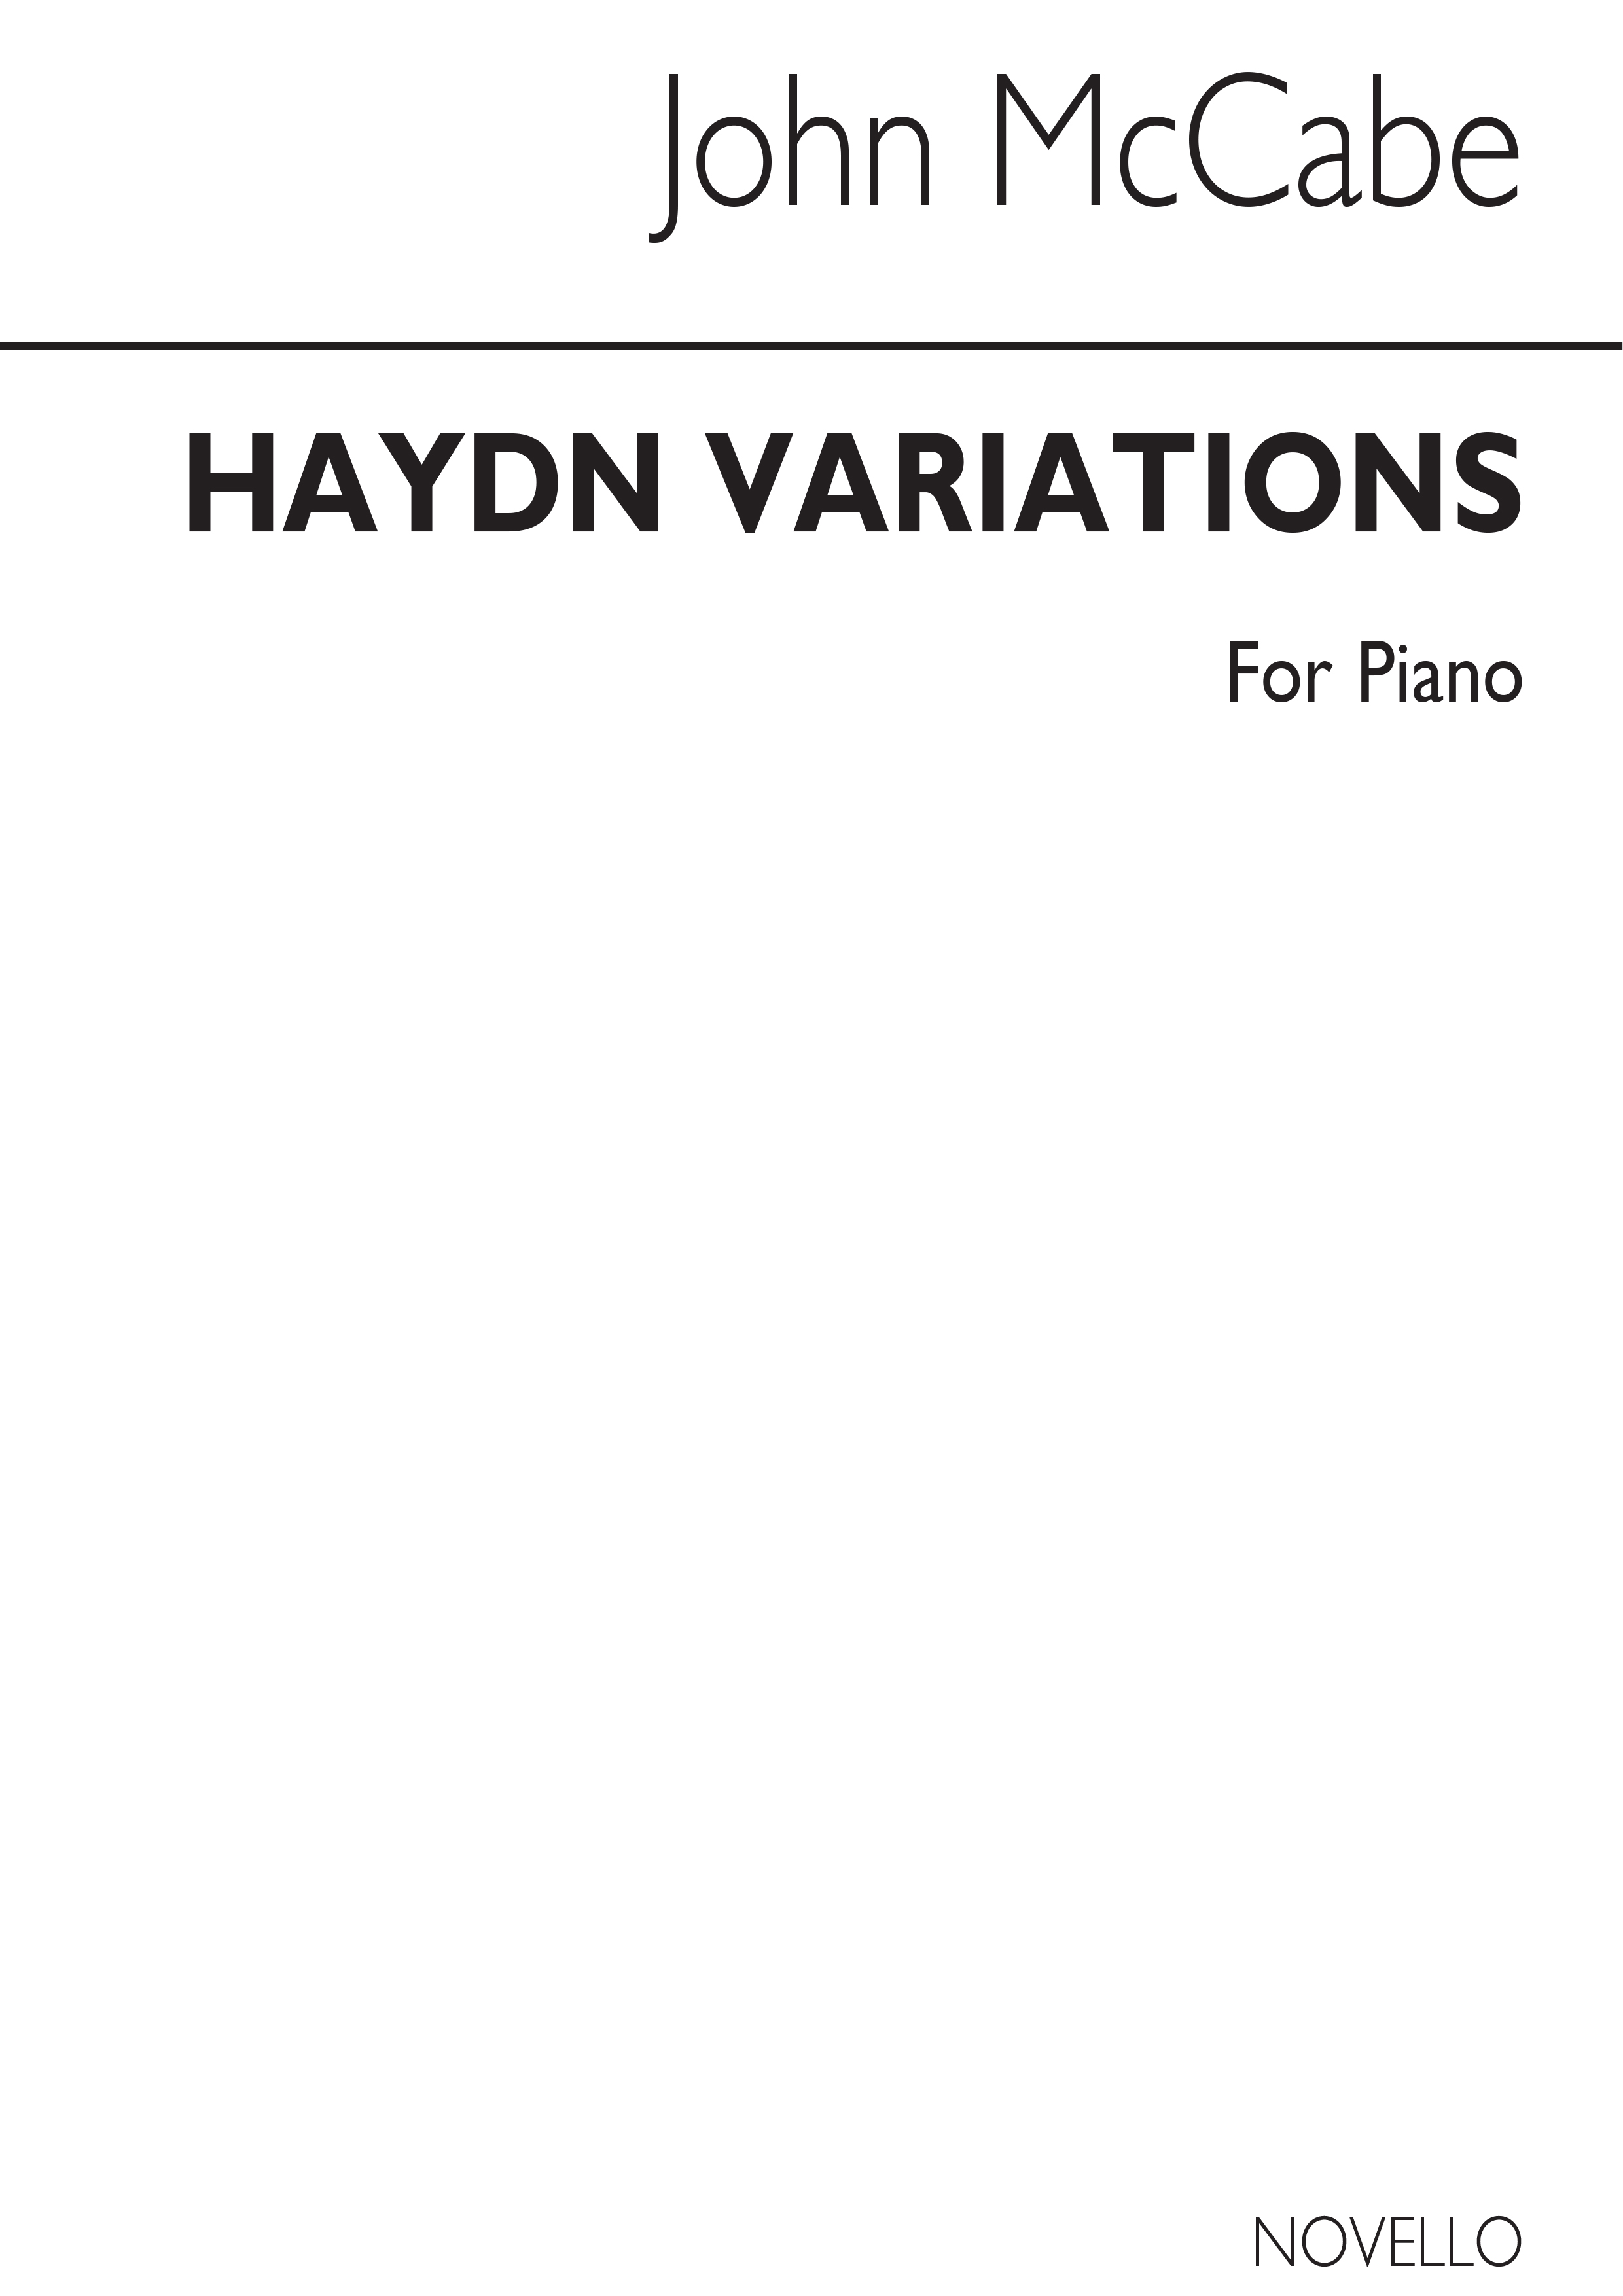 McCabe: Haydn Variations for Piano